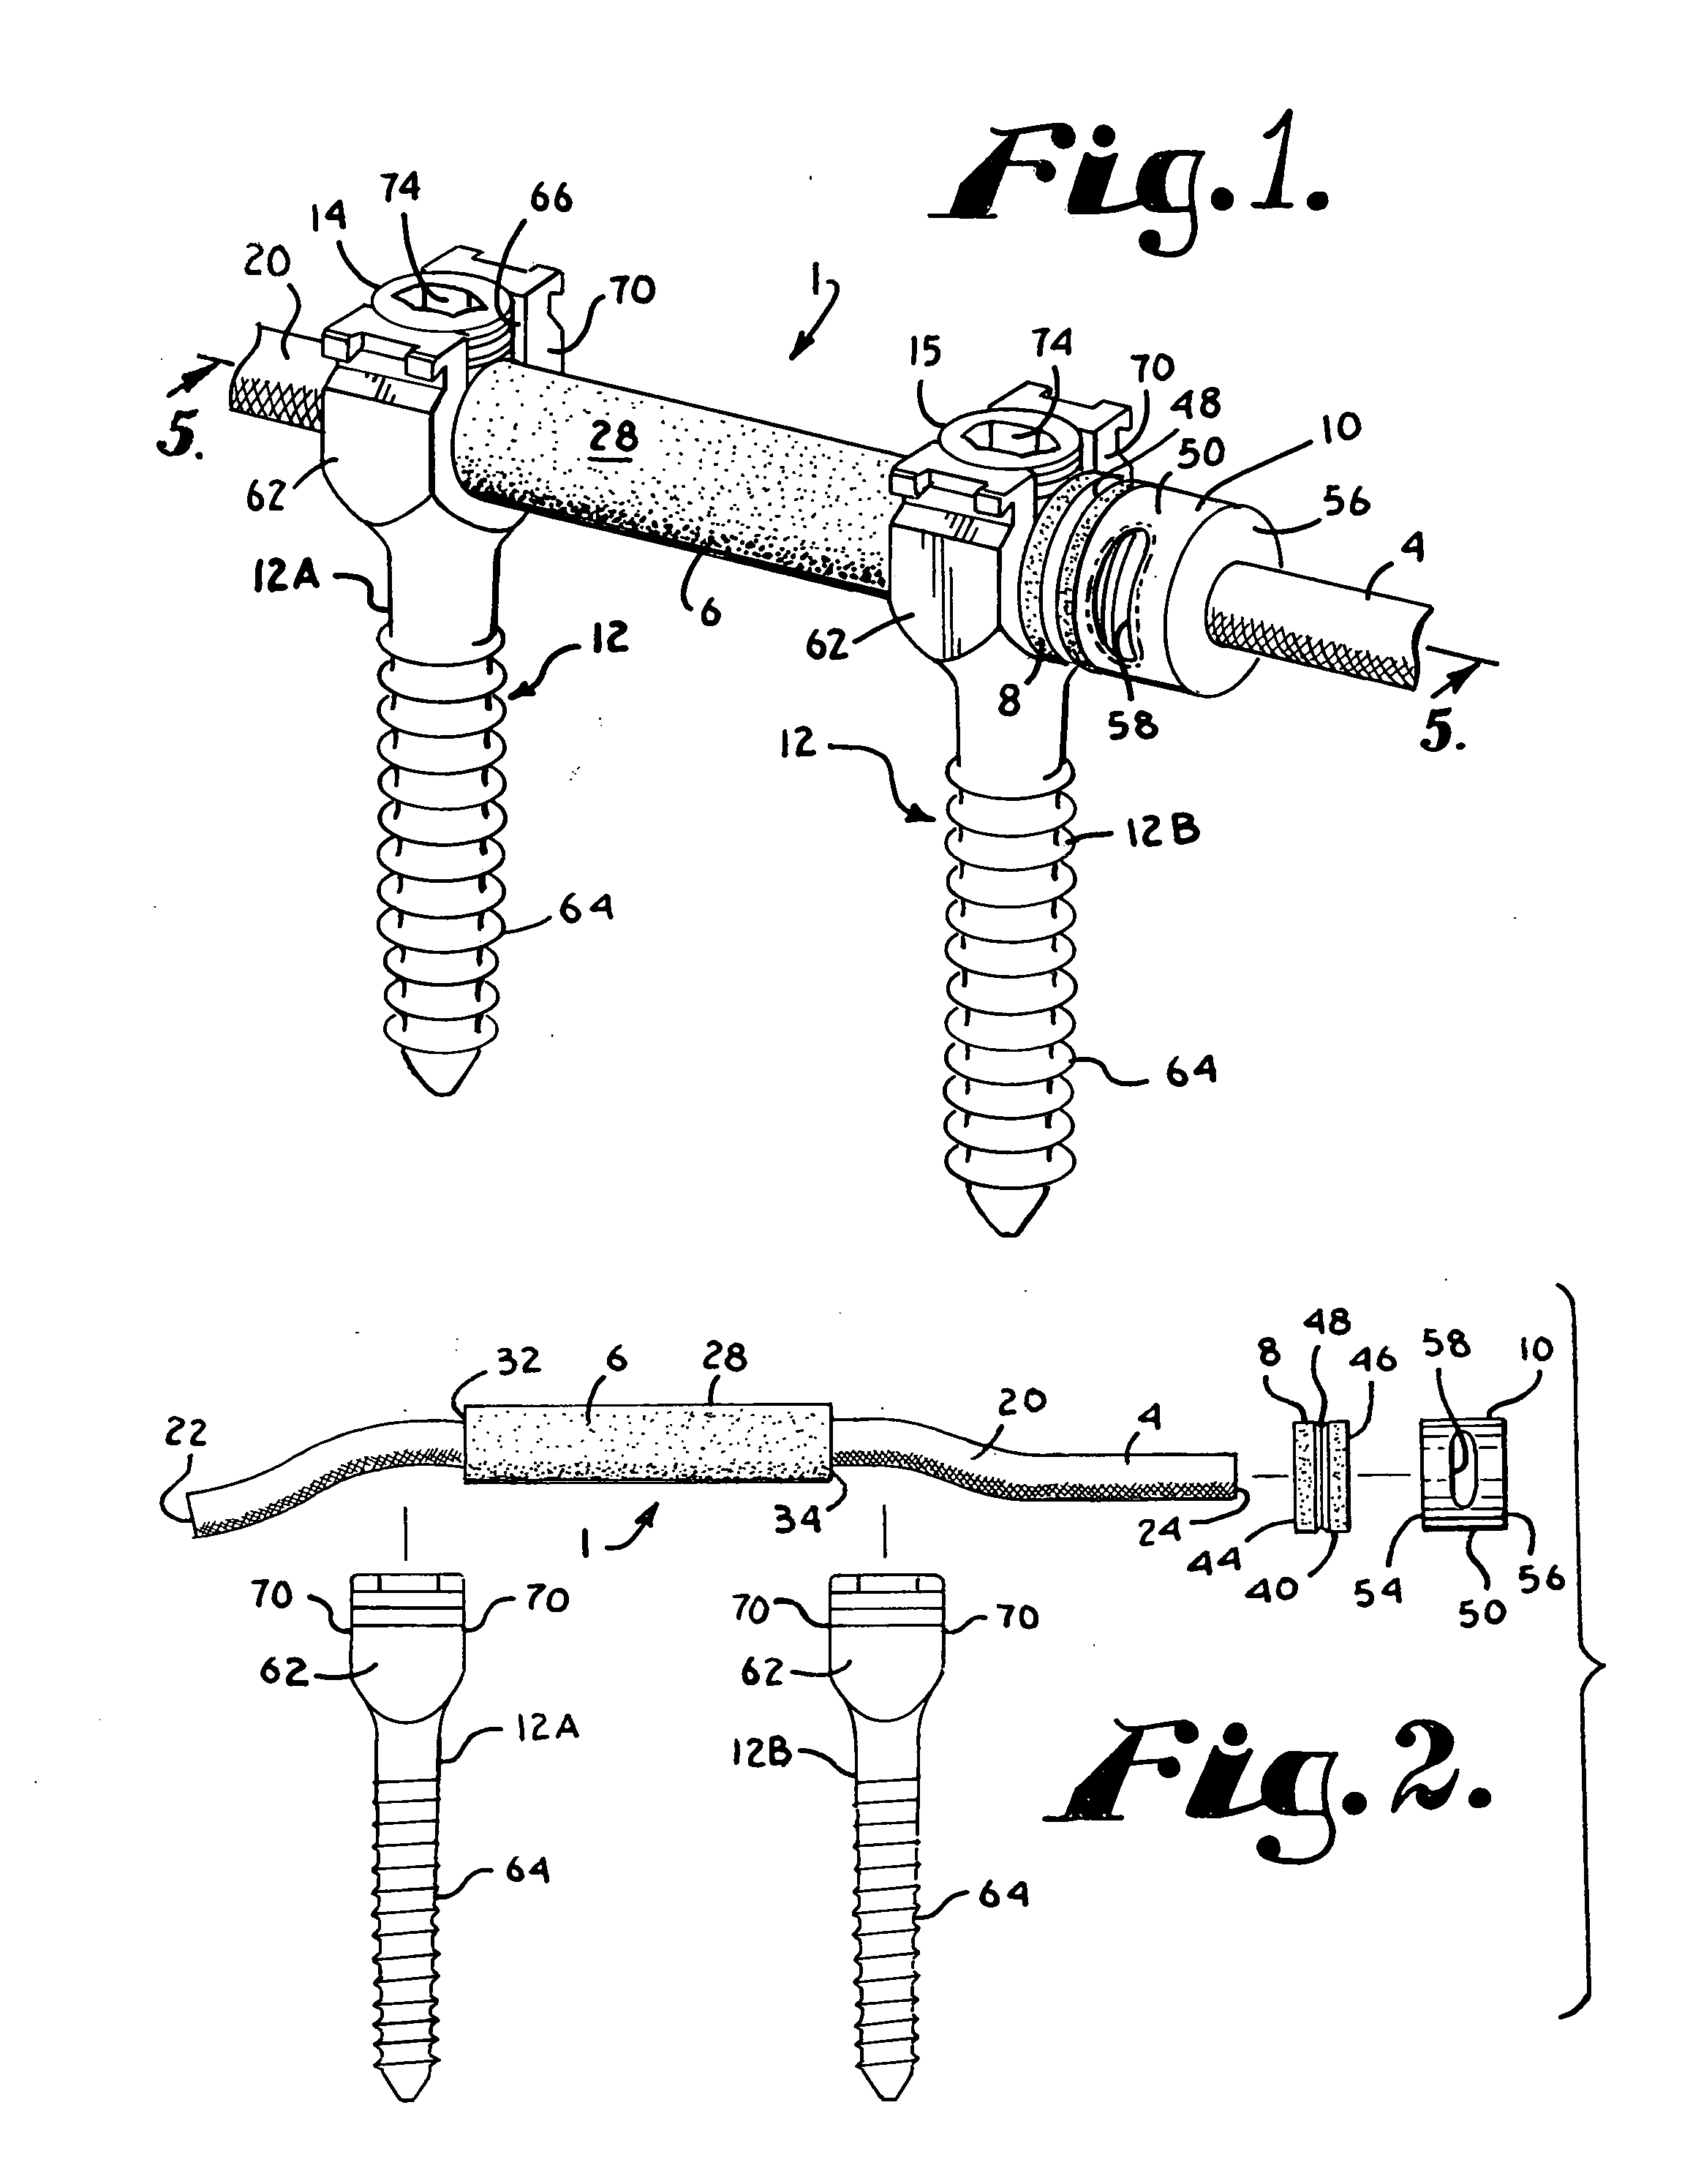 Dynamic spinal stabilization assembly with elastic bumpers and locking limited travel closure mechanisms